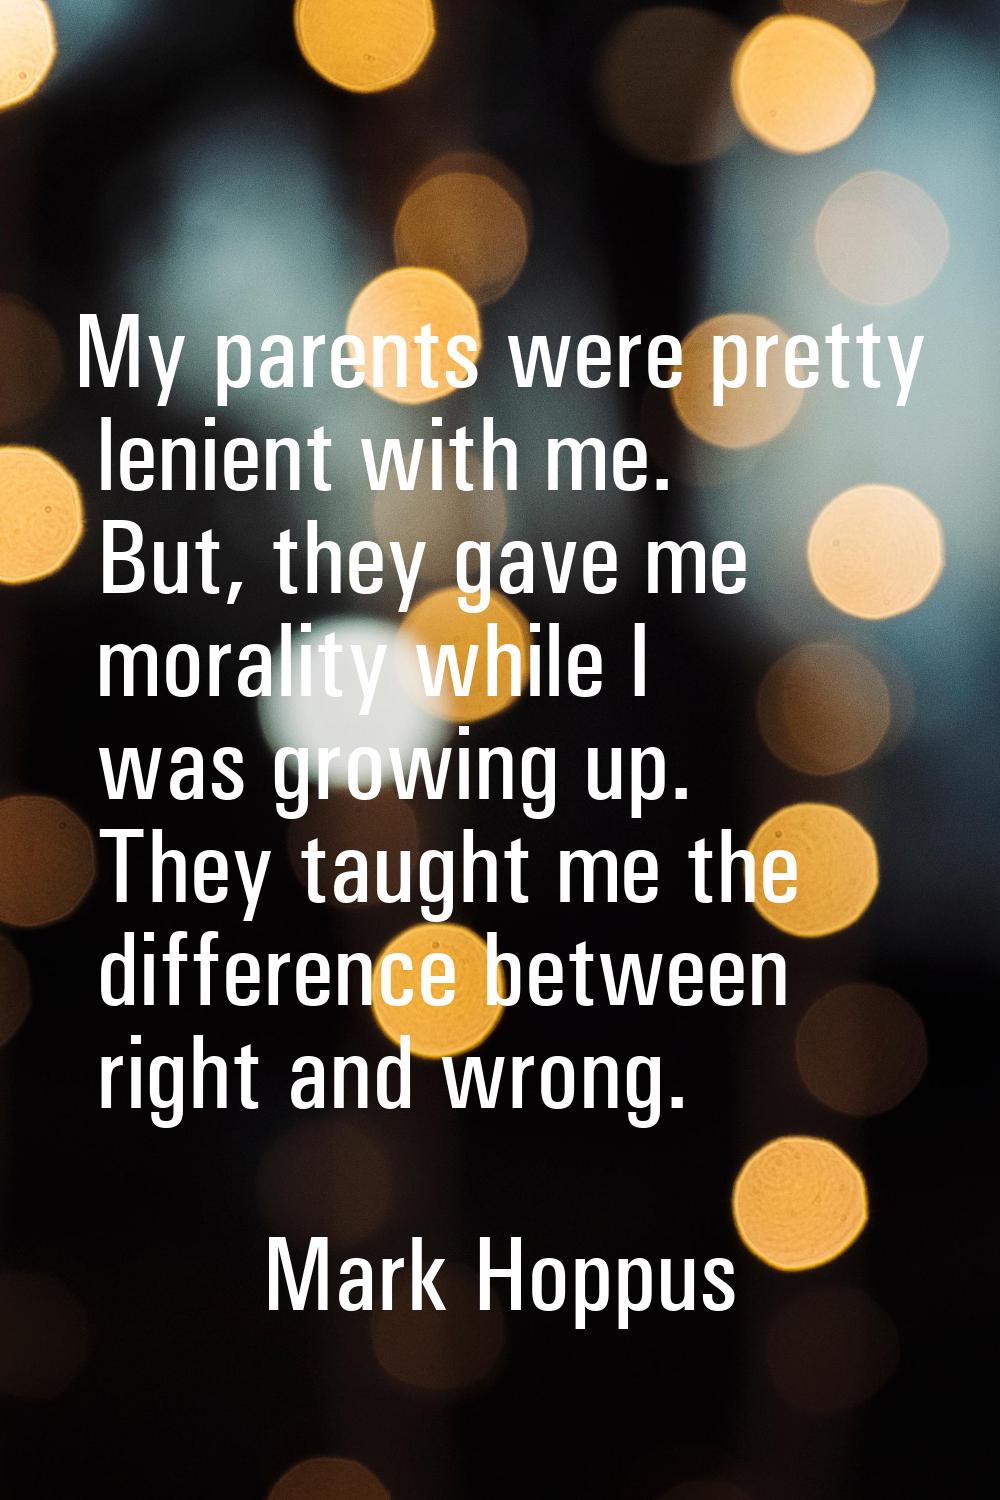 My parents were pretty lenient with me. But, they gave me morality while I was growing up. They tau